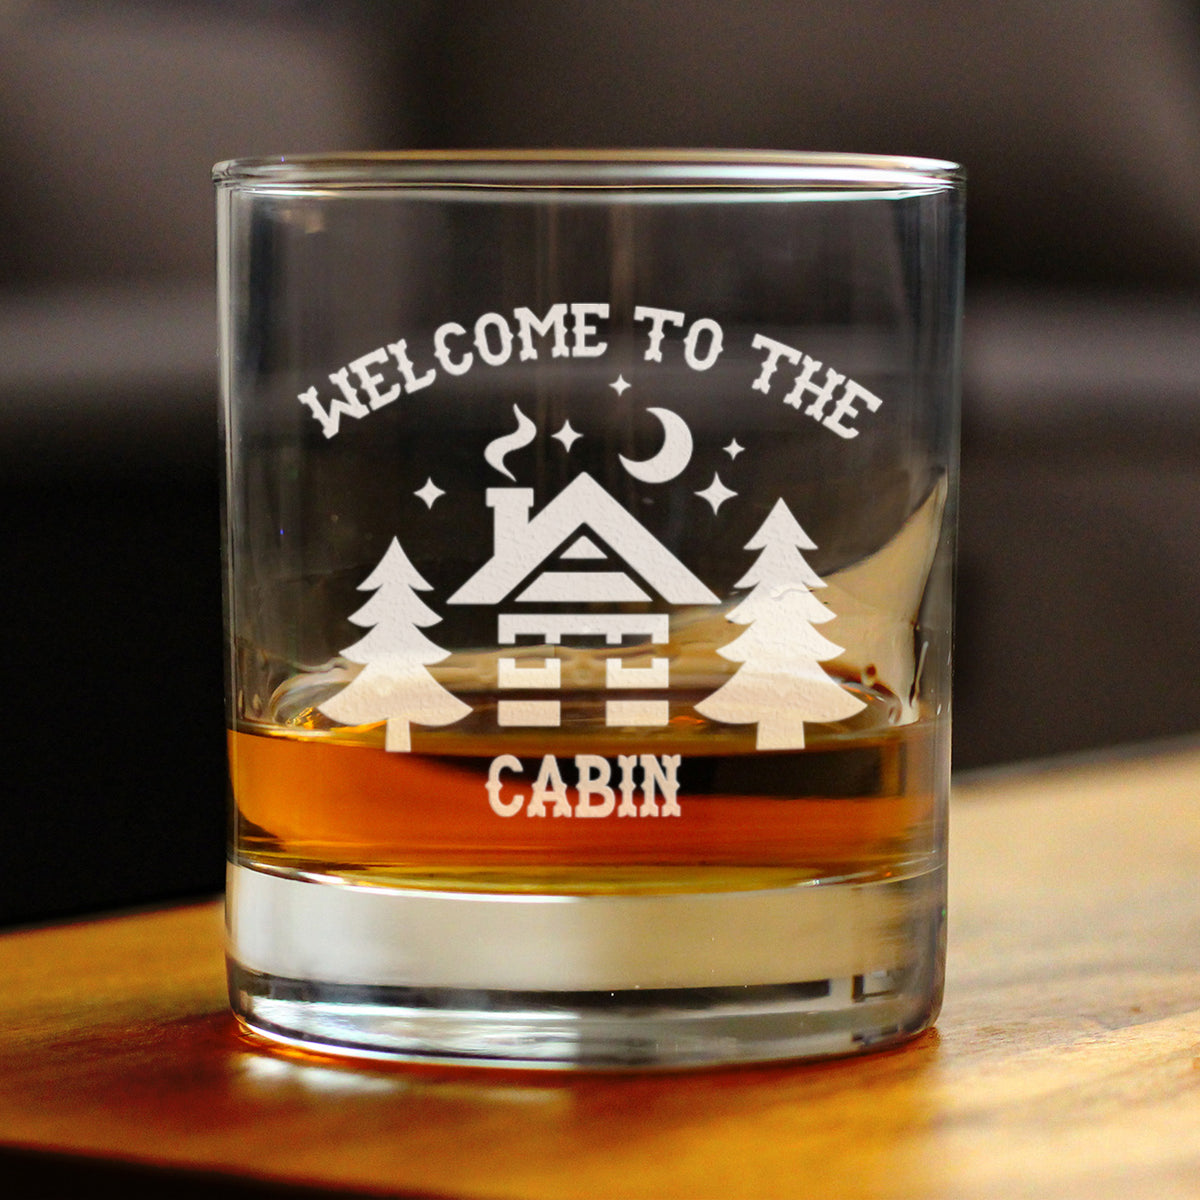 Welcome To The Cabin - Whiskey Rocks Glass Gifts - Rustic Themed Gifts and Cabin Decor Large - 10.25 Oz Glasses